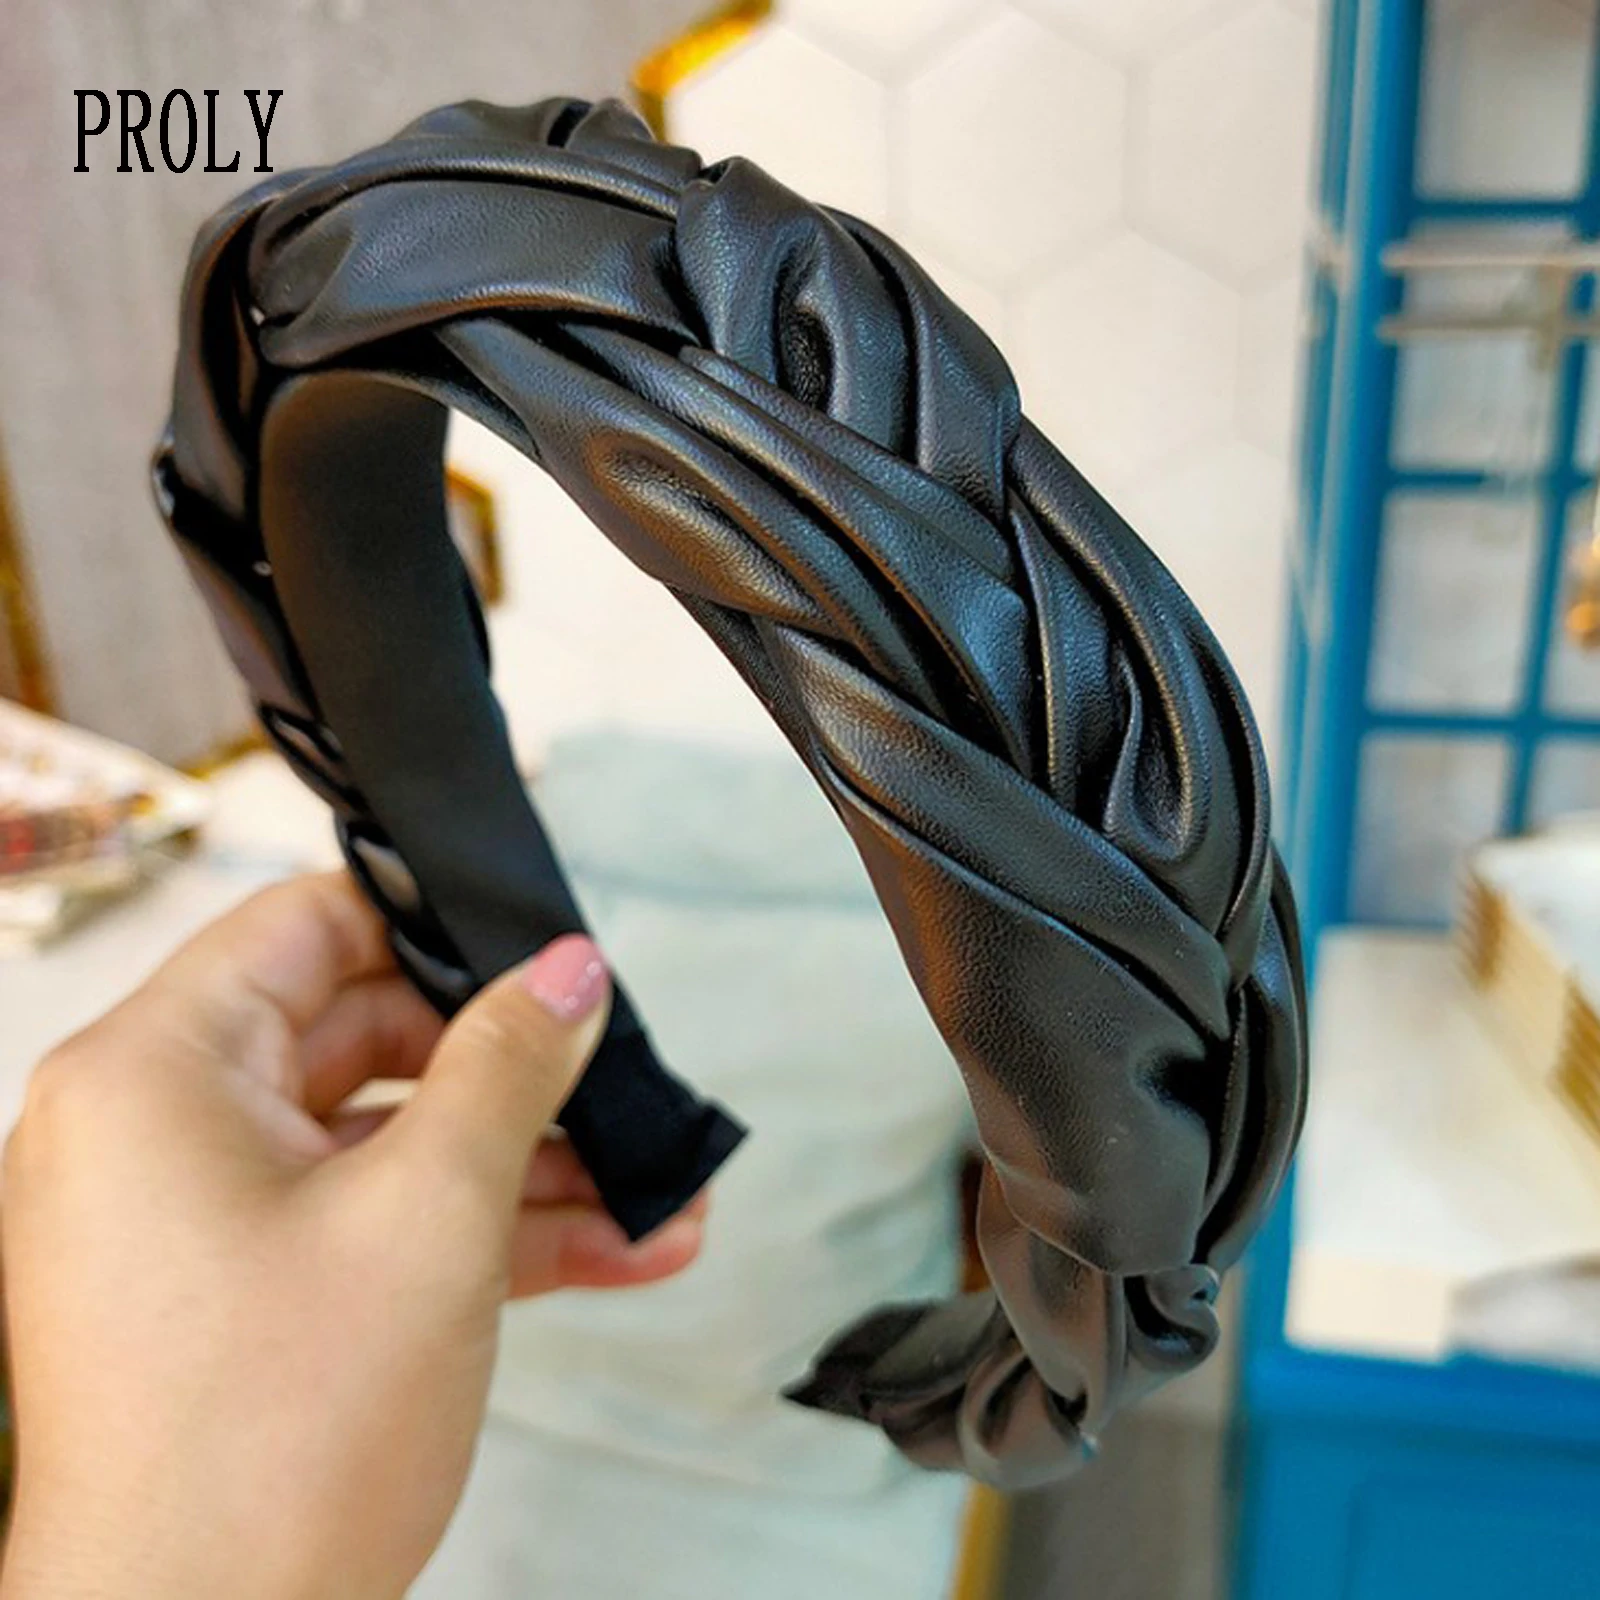 PROLY New Fashion Hair Accessories For Women Leather Hairband Cross Knot Braid Headband Adult Wide Side Headwear Hair Hoop hair clips for women